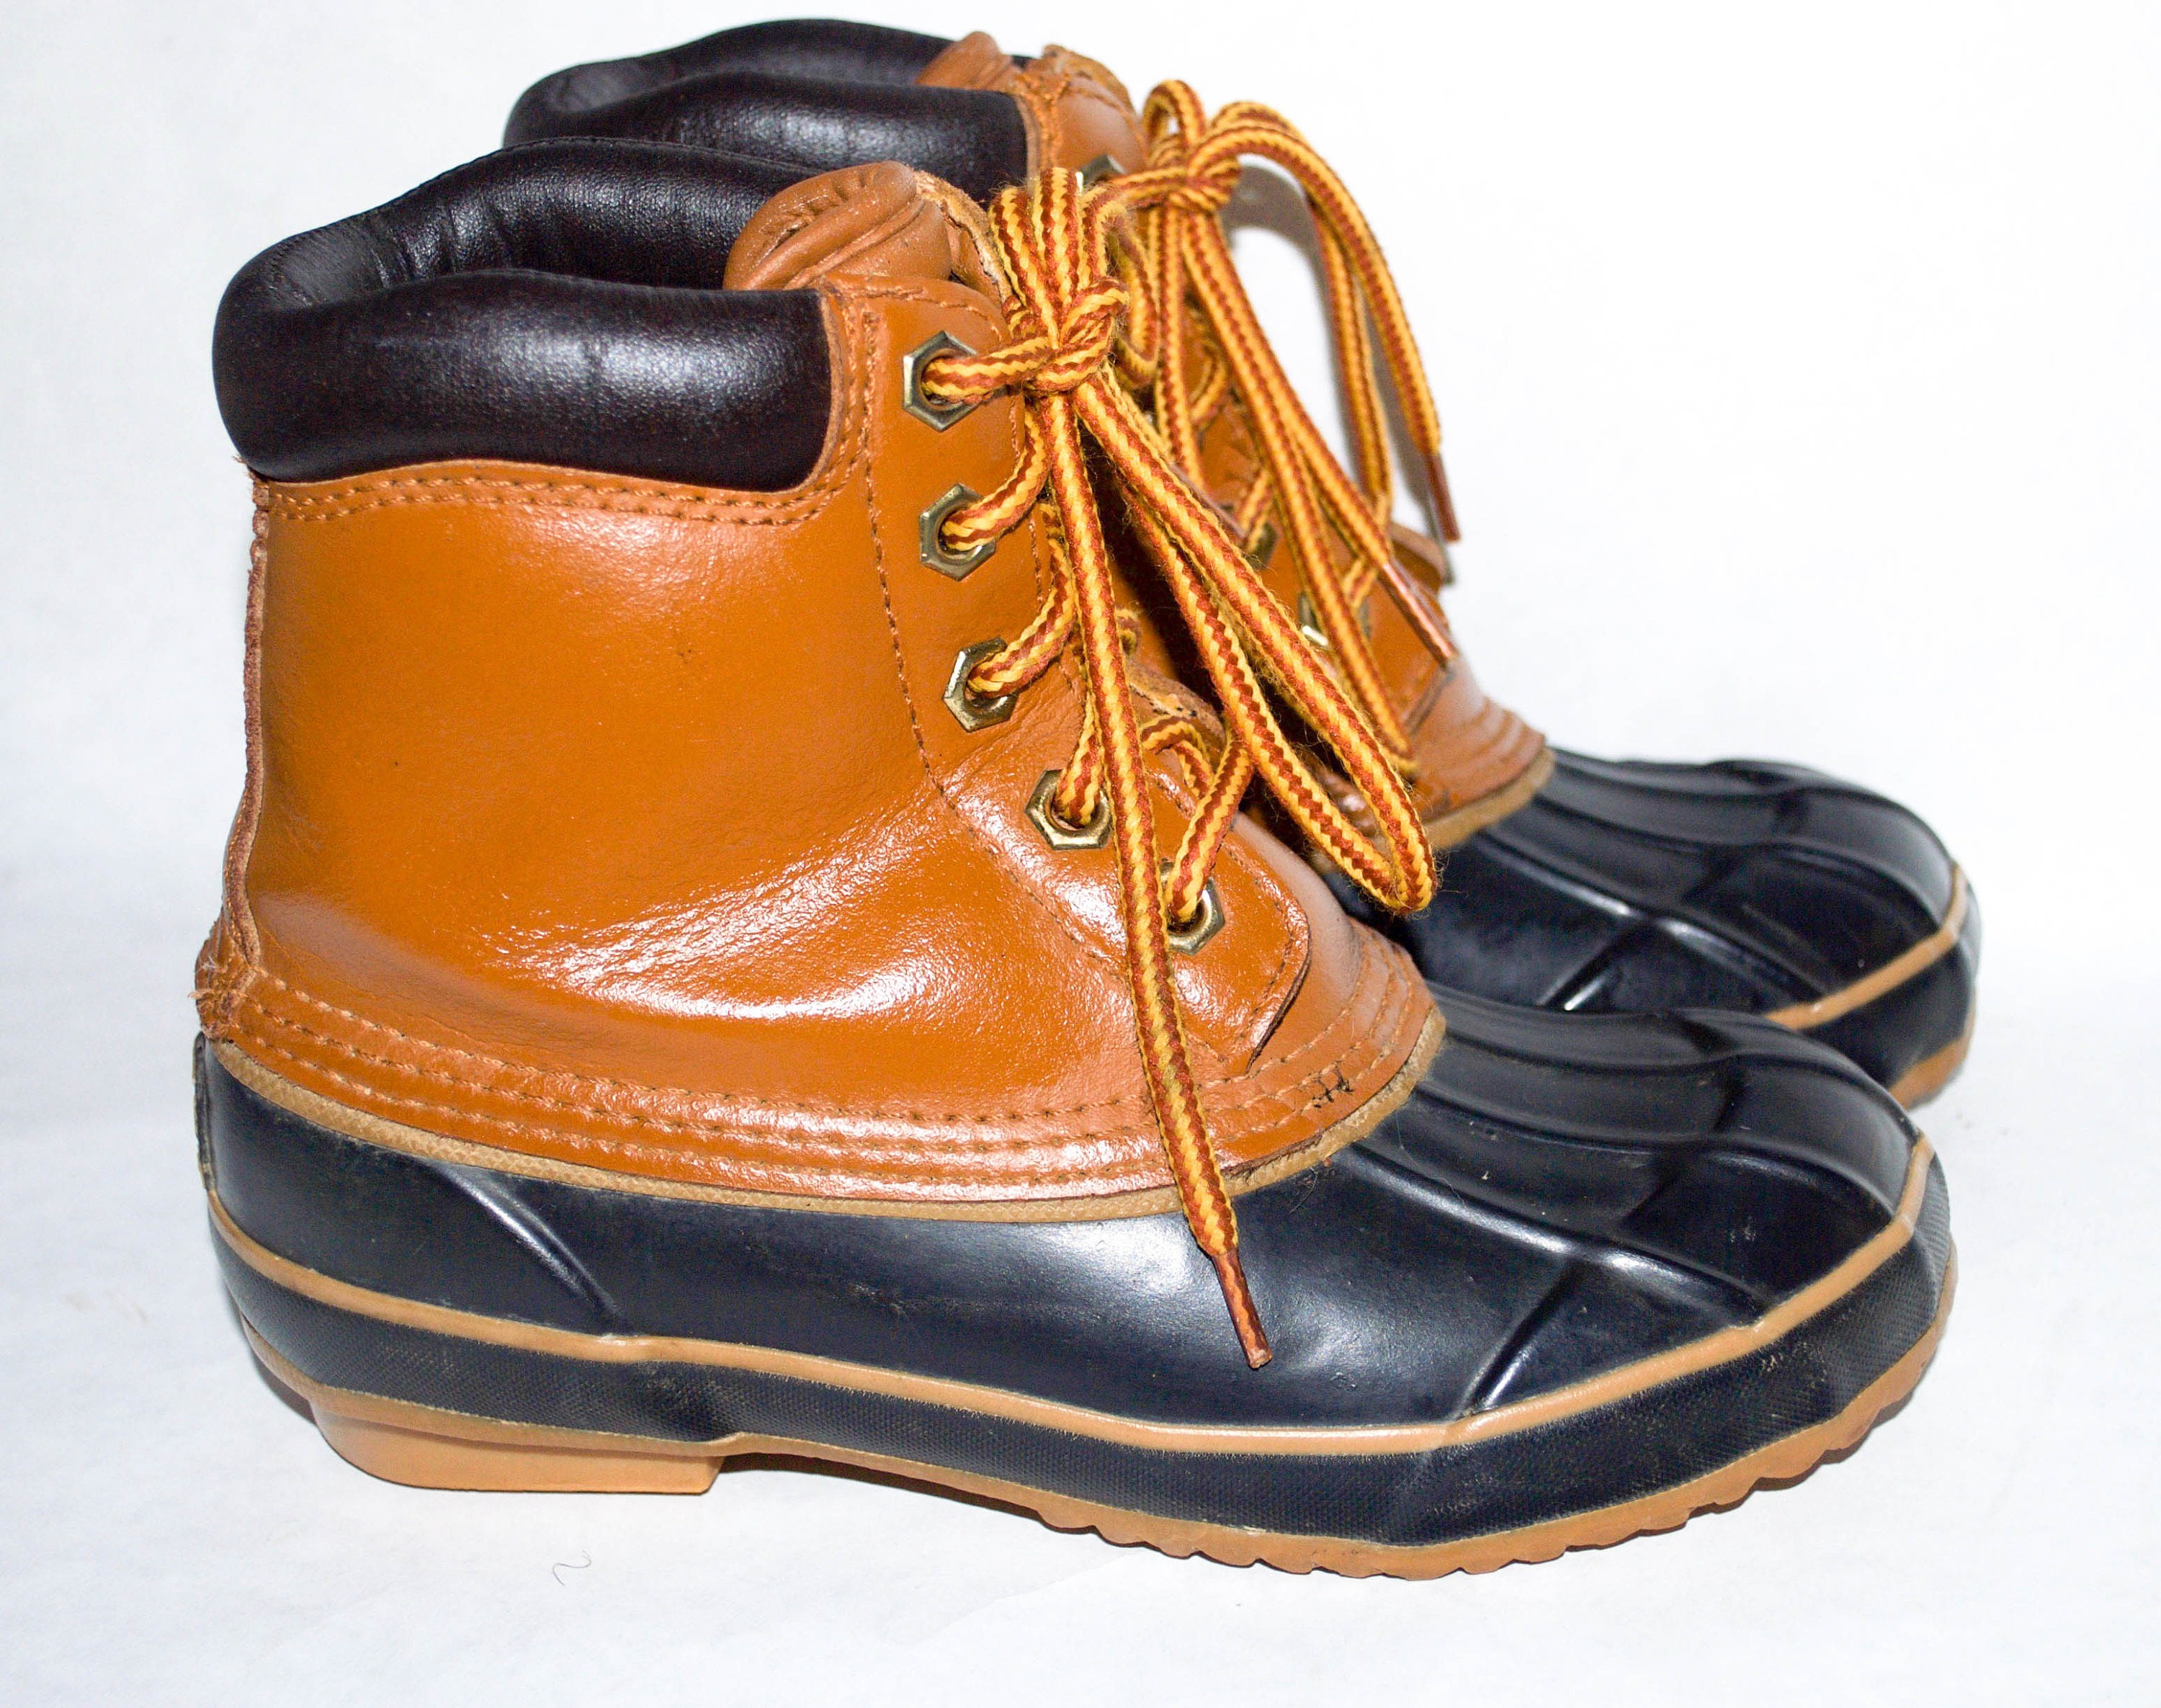 Thinsulate Boots -